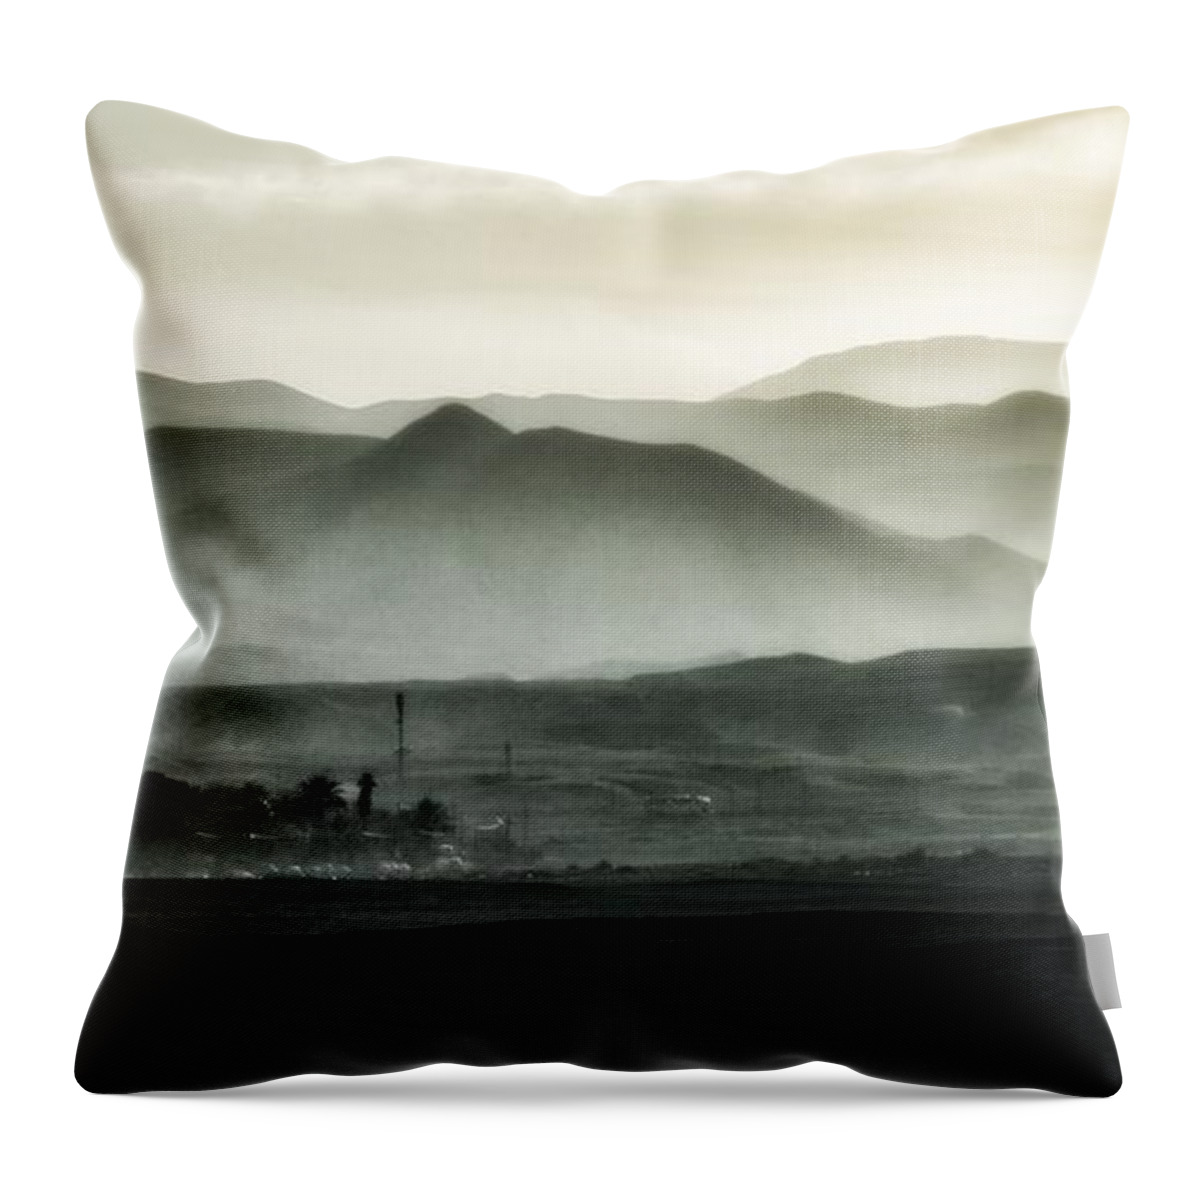 Israel Throw Pillow featuring the photograph Judean Wilderness 2 by Mark Fuller